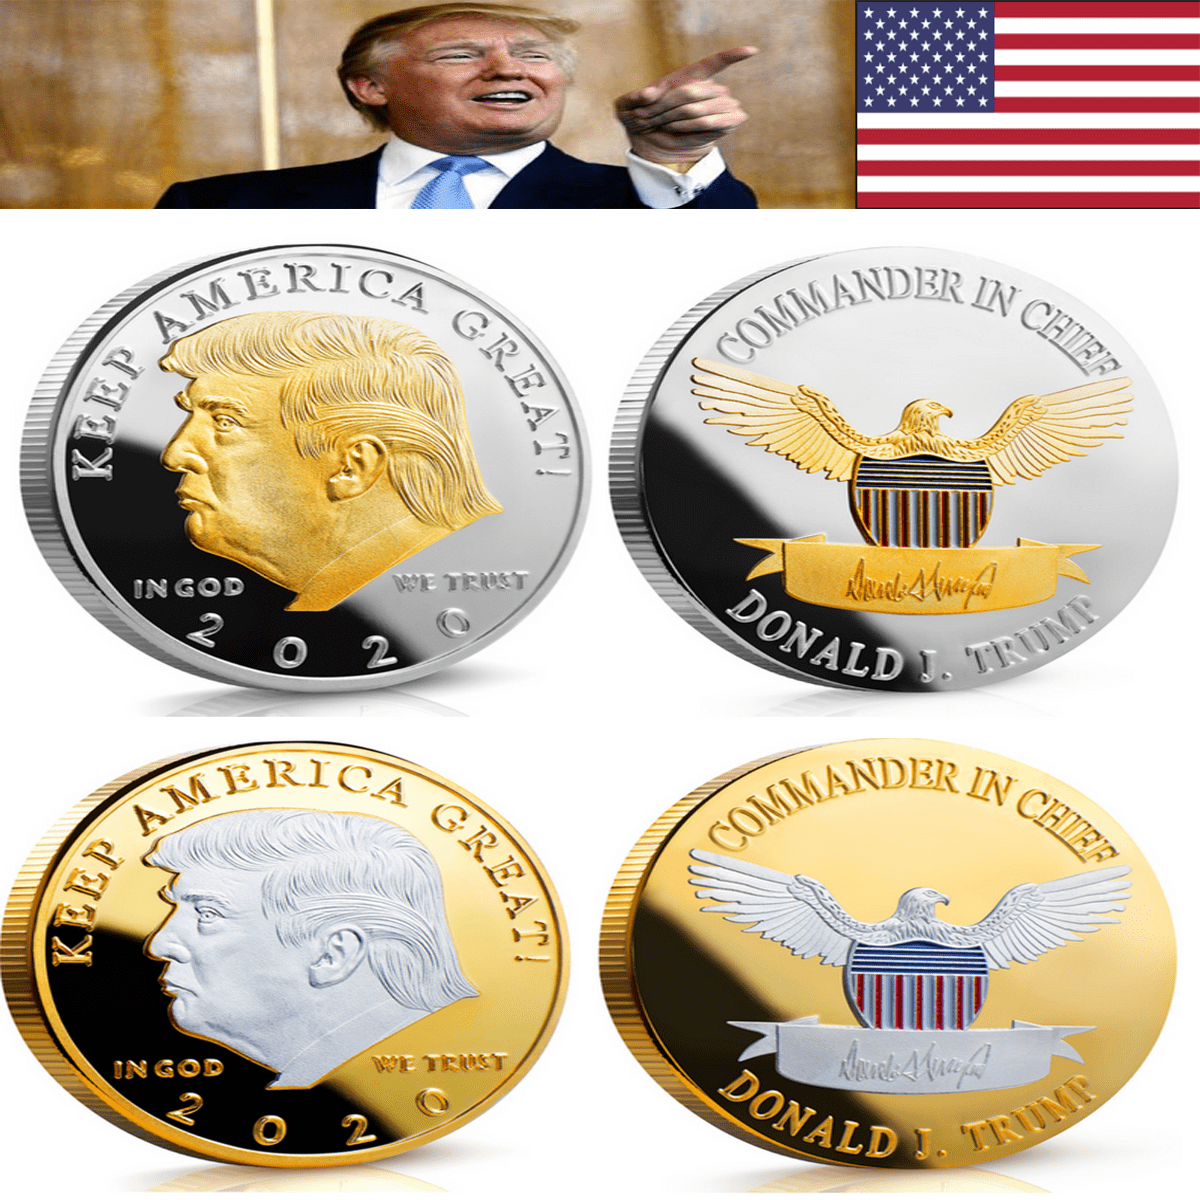 5x Donald Trump 2020 Keep America Great Commemorative Challenge Eagle Coins Yc 